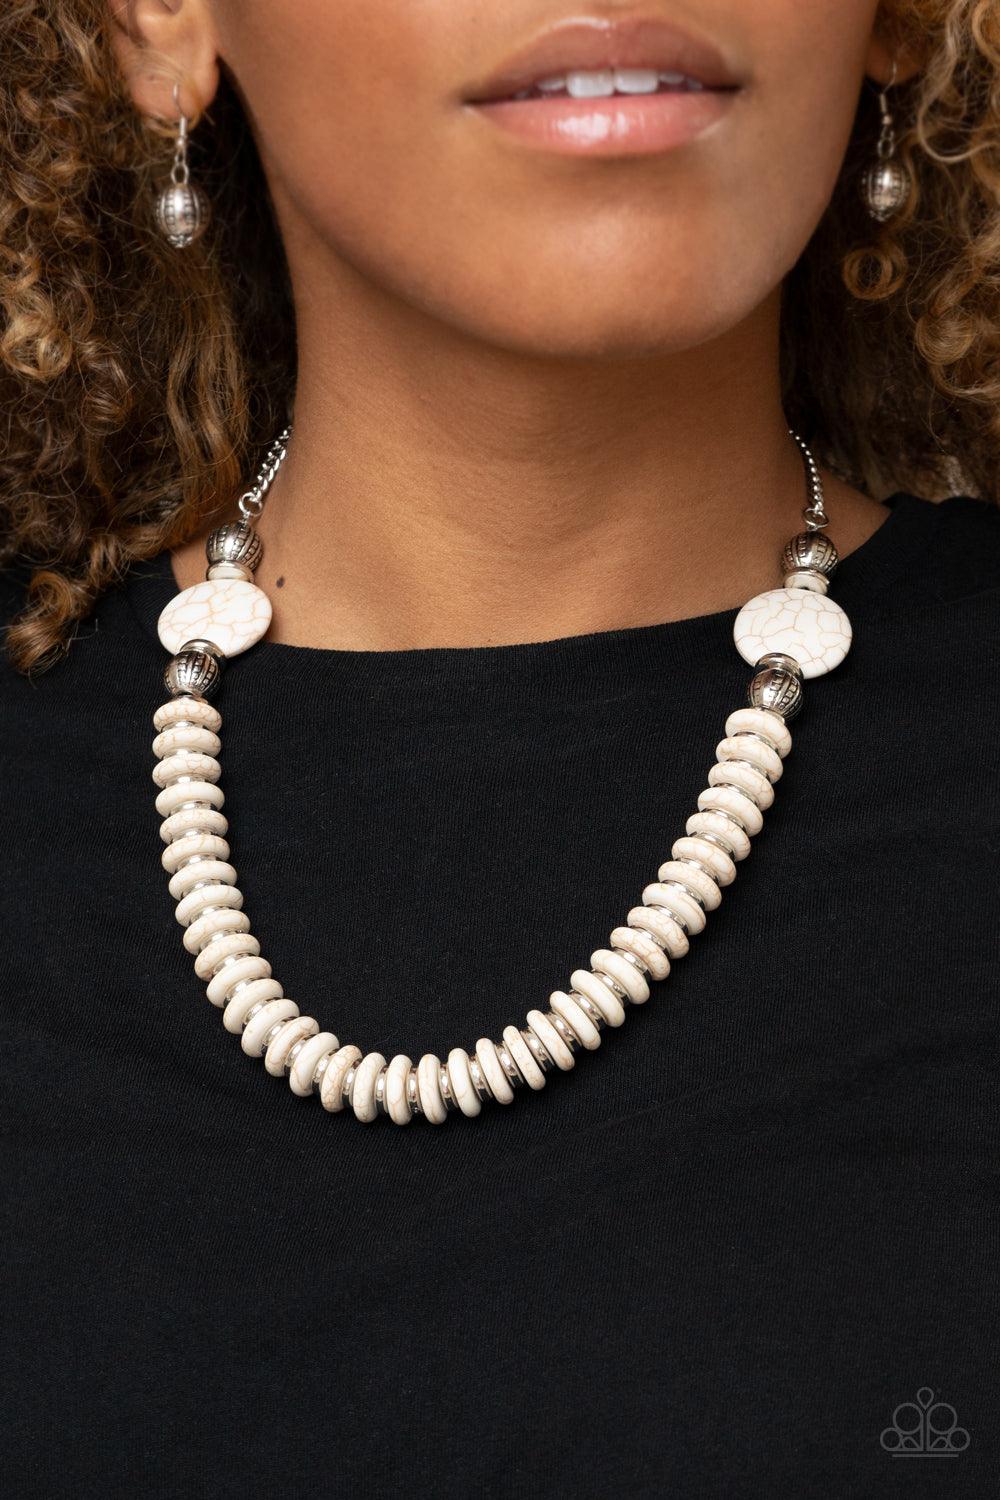 Paparazzi Accessories Desert Revival - White Flanked by ornate silver beads, two oversized white stones give way to an alternating strand of shiny silver and refreshing white stone discs for an authentically artisan inspired look below the collar. Feature